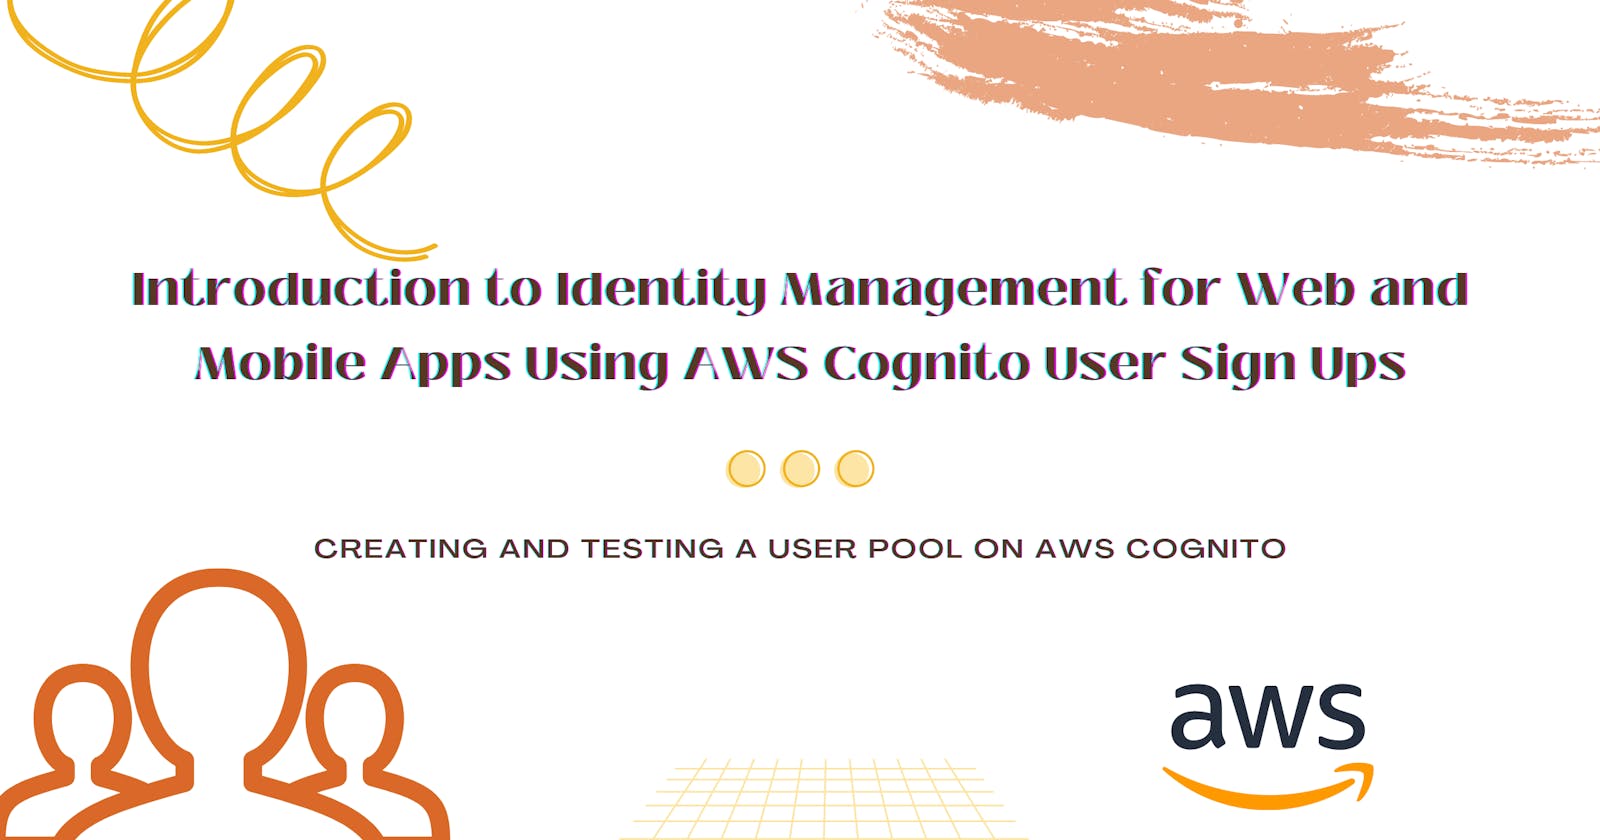 Introduction to Identity Management for Web and Mobile Apps Using AWS Cognito User Sign Ups